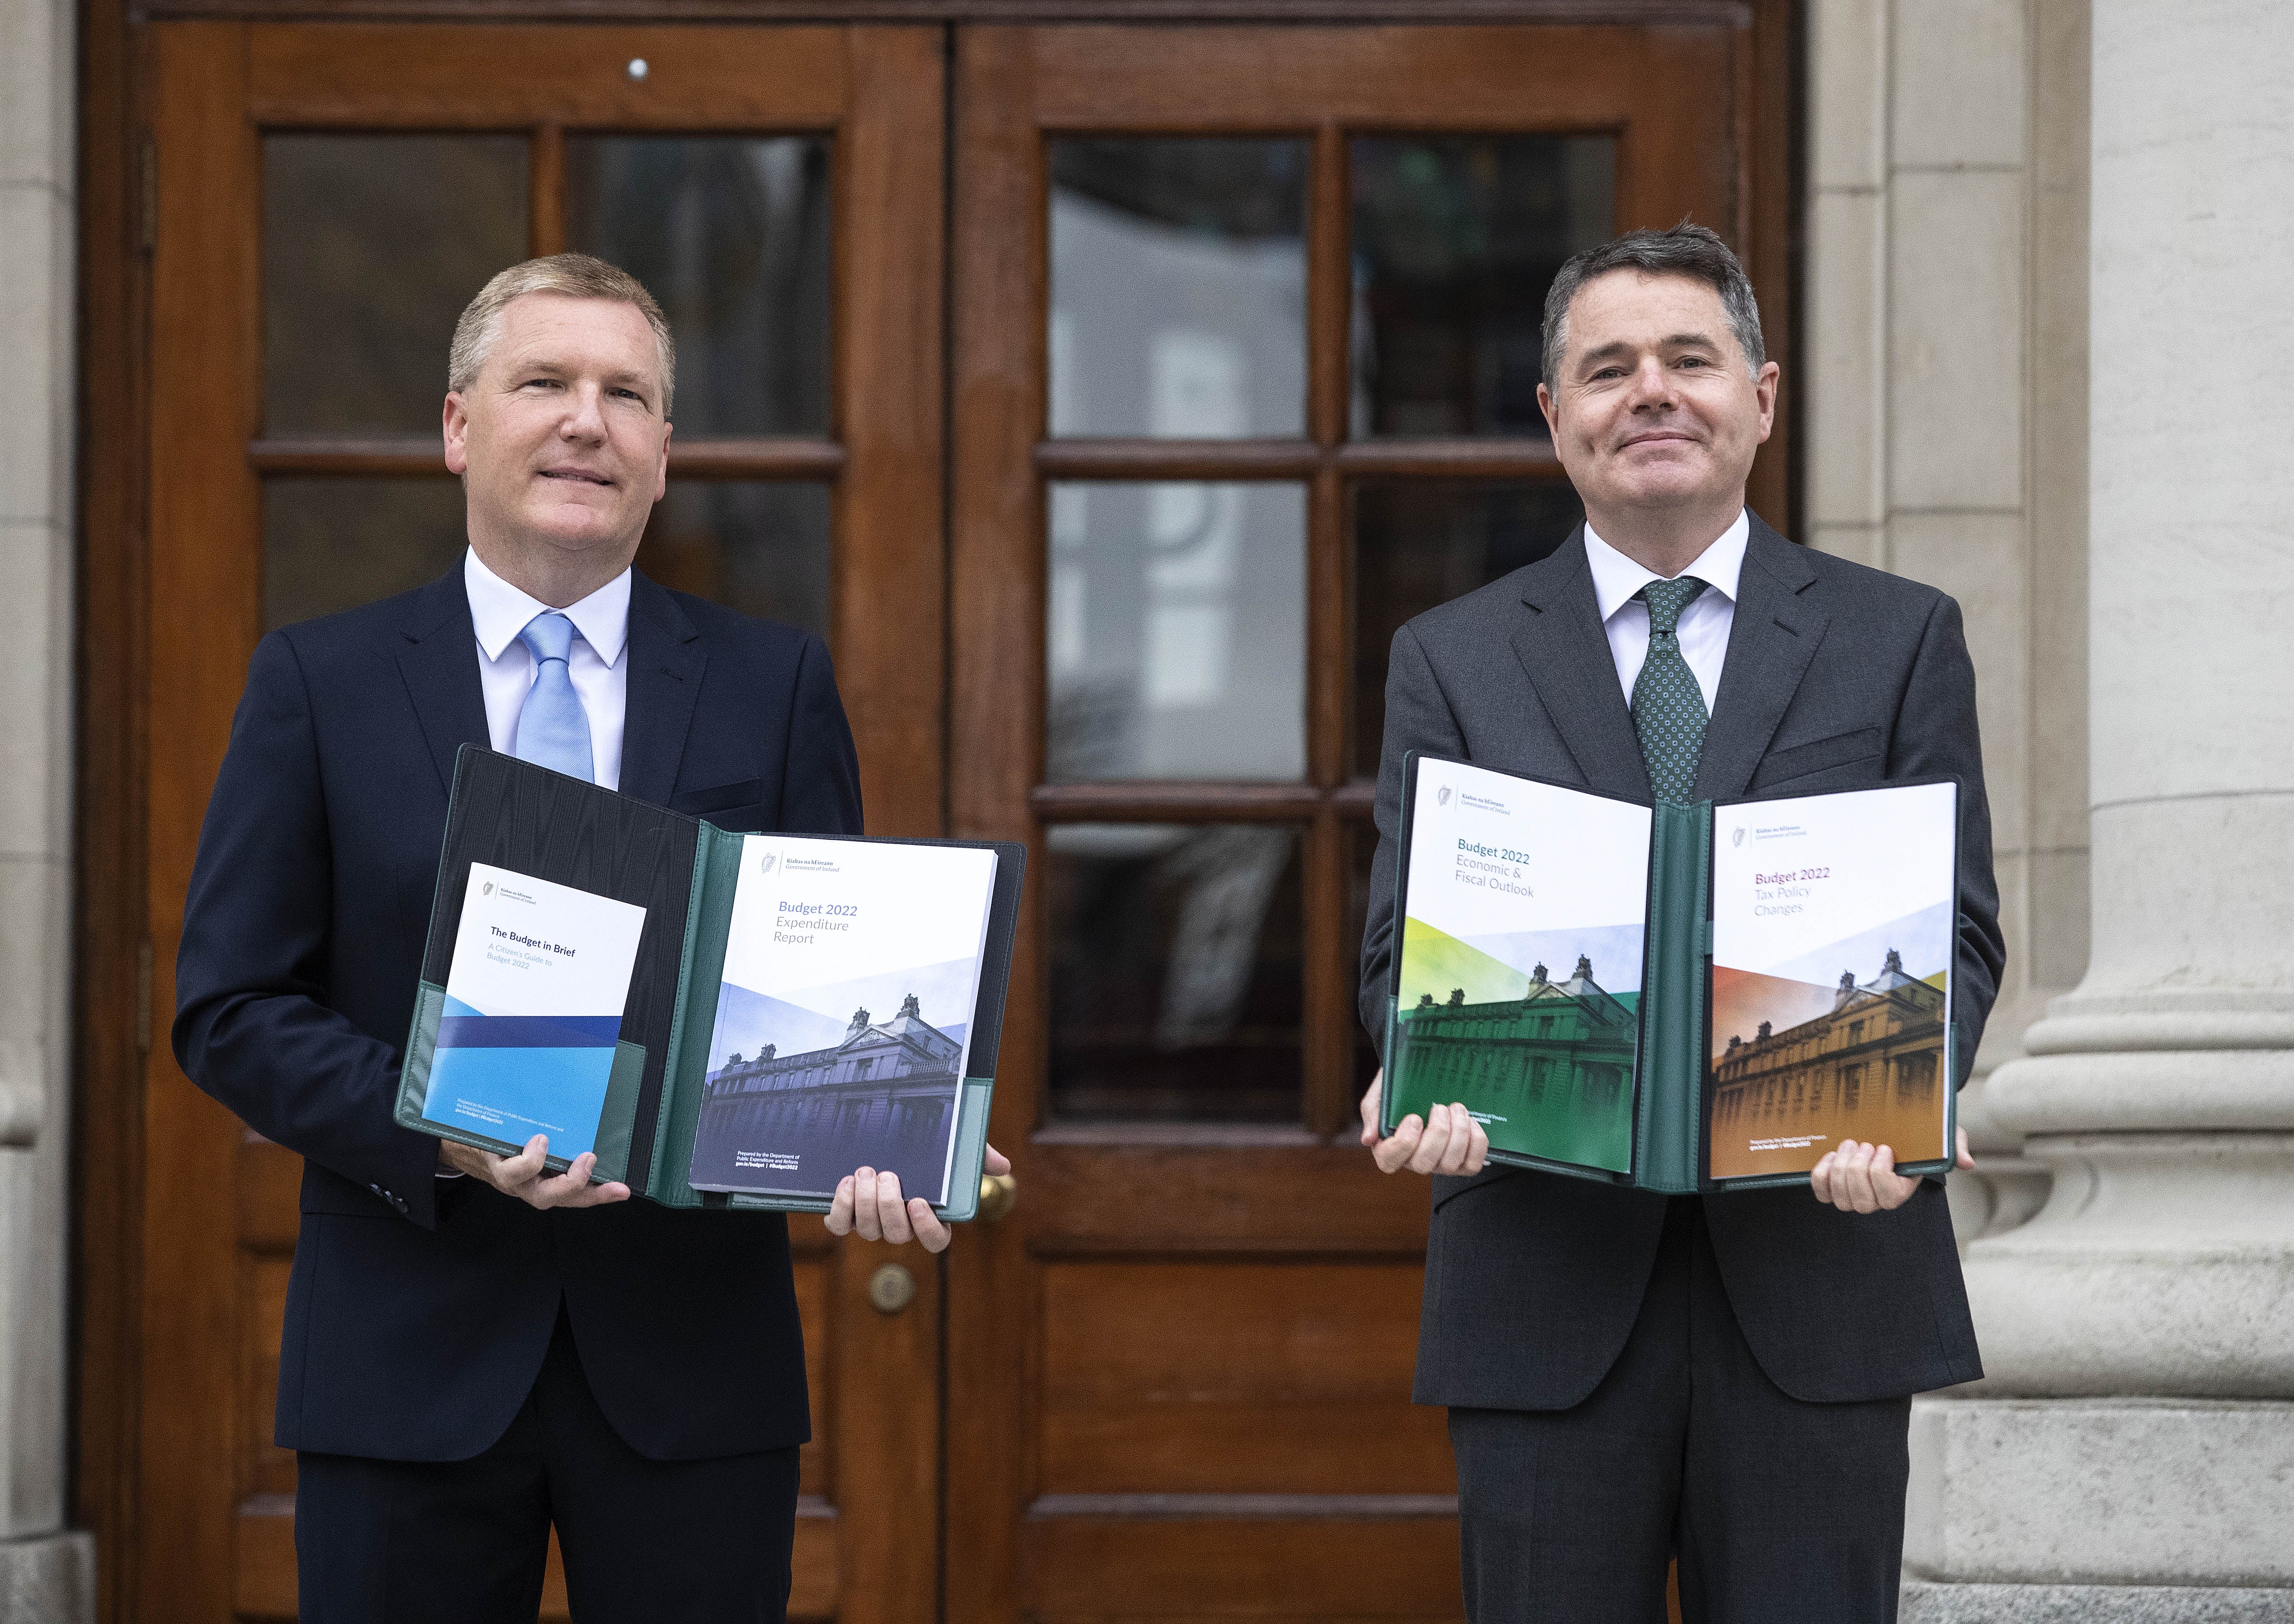 Minister for Finance Paschal Donohoe (right) and Minister for Public Expenditure and Reform Michael McGrath arrive at Government Buildings to unveil the Government’s Budget for 2022 (Damien Eagers/PA)